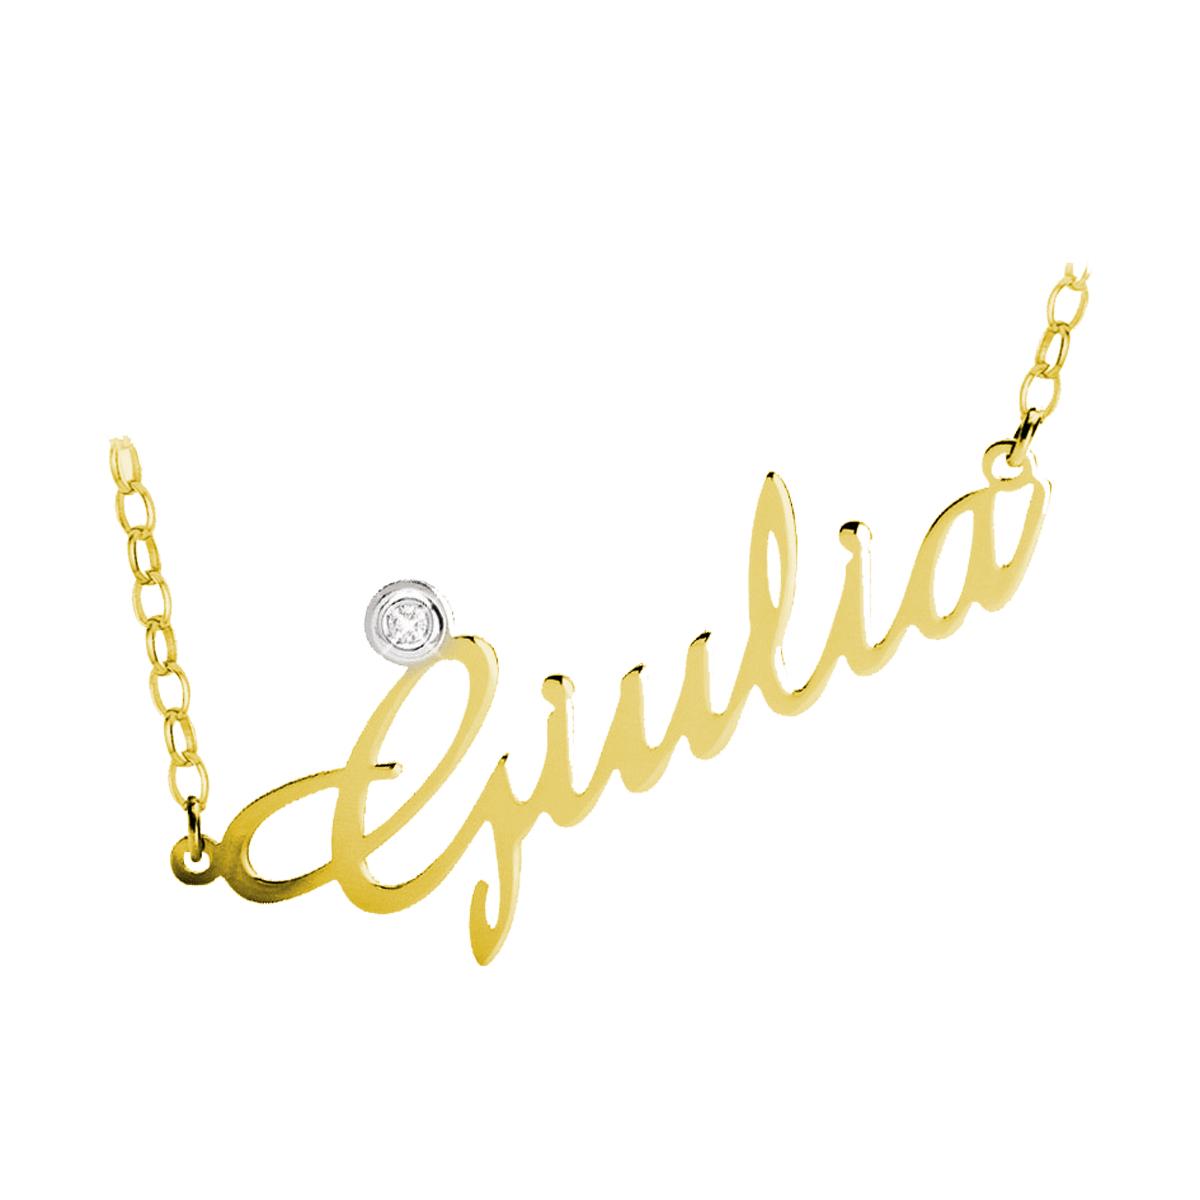 Personalized necklaces in gold-plated 925 silver, various sizes, all names available